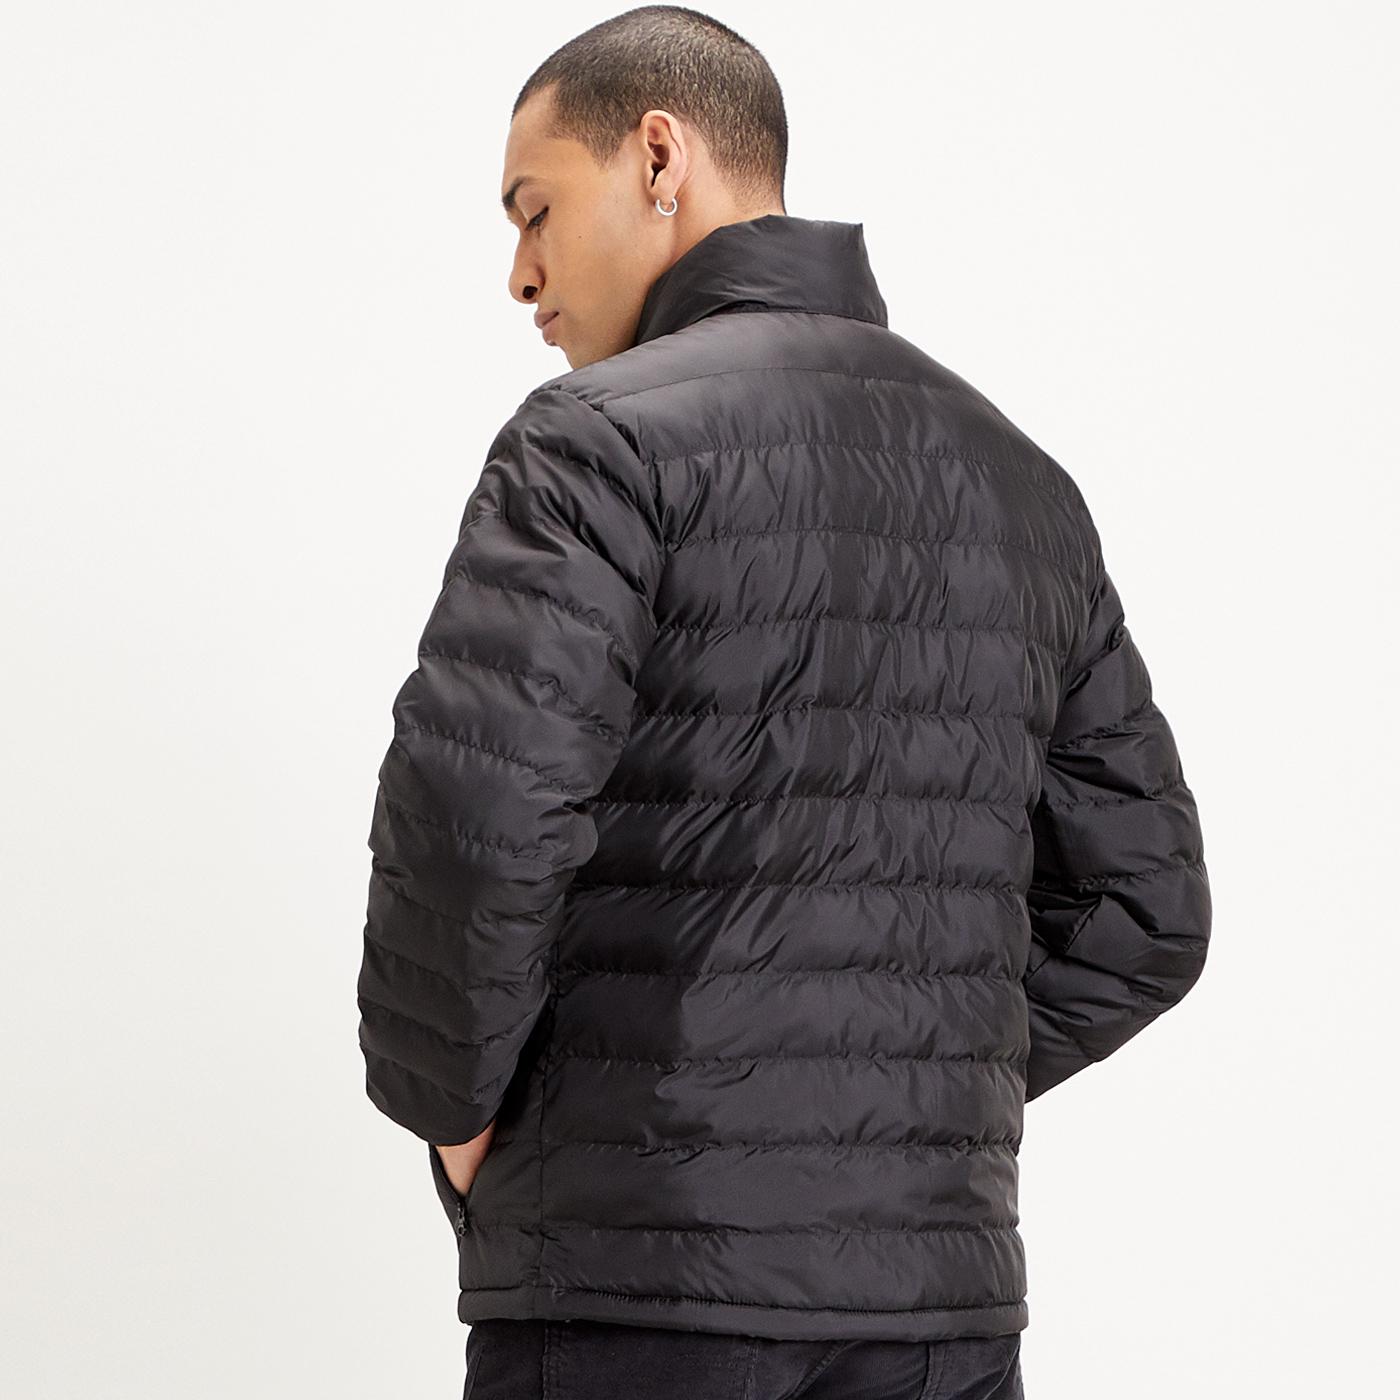 Presidio LEVI'S Retro 90s Indie Packable Quilted Jacket Black